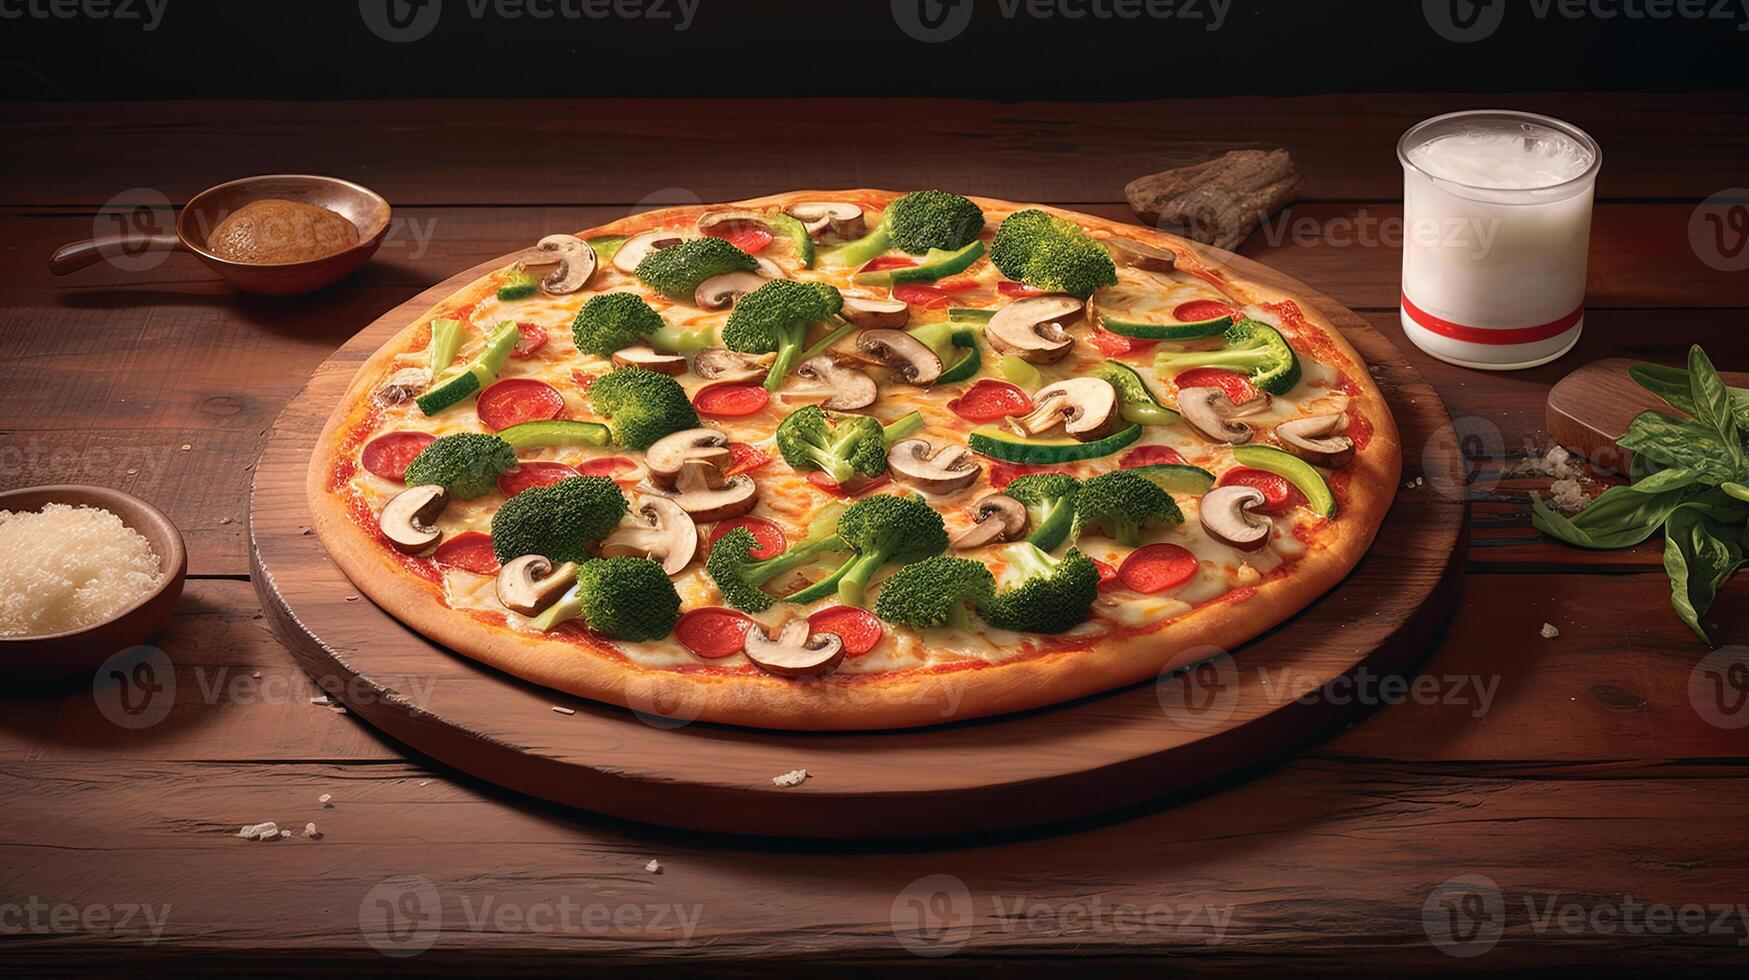 Delicious Veggie Supreme or Deluxe Pizza with Pepperoni on Wooden Cutting Board for Italian Food Ready To Eat Concept, Food Photography. Template or Banner for Restaurant. . photo